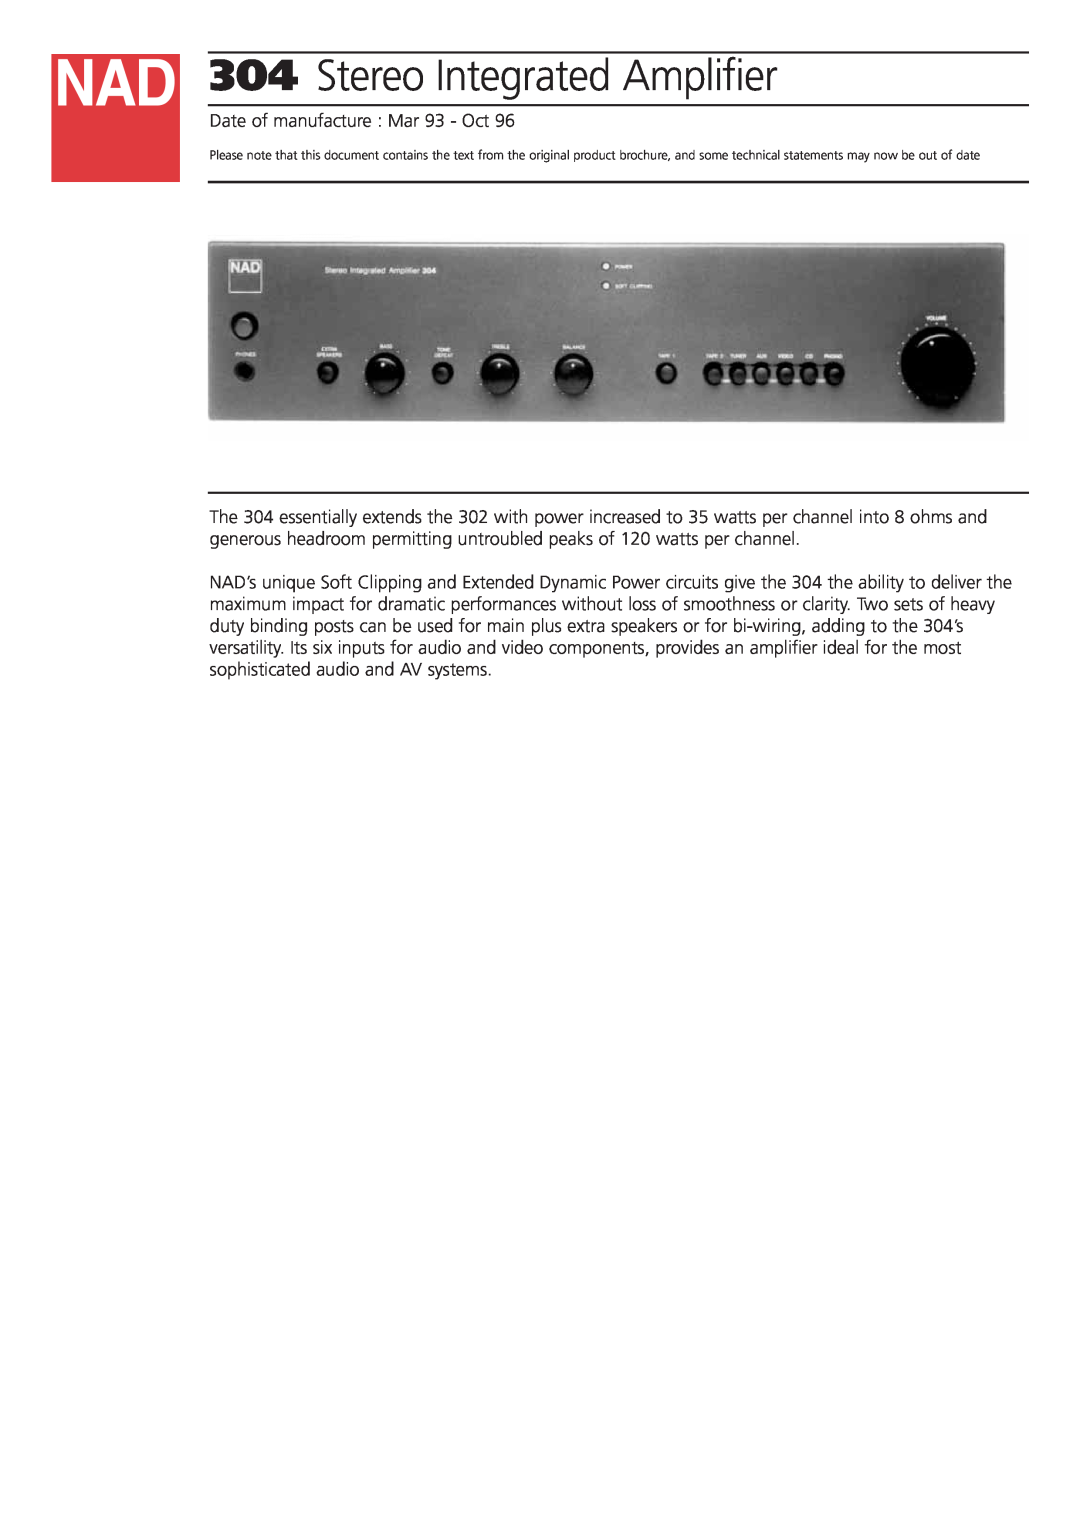 NAD brochure 304Stereo Integrated Amplifier 